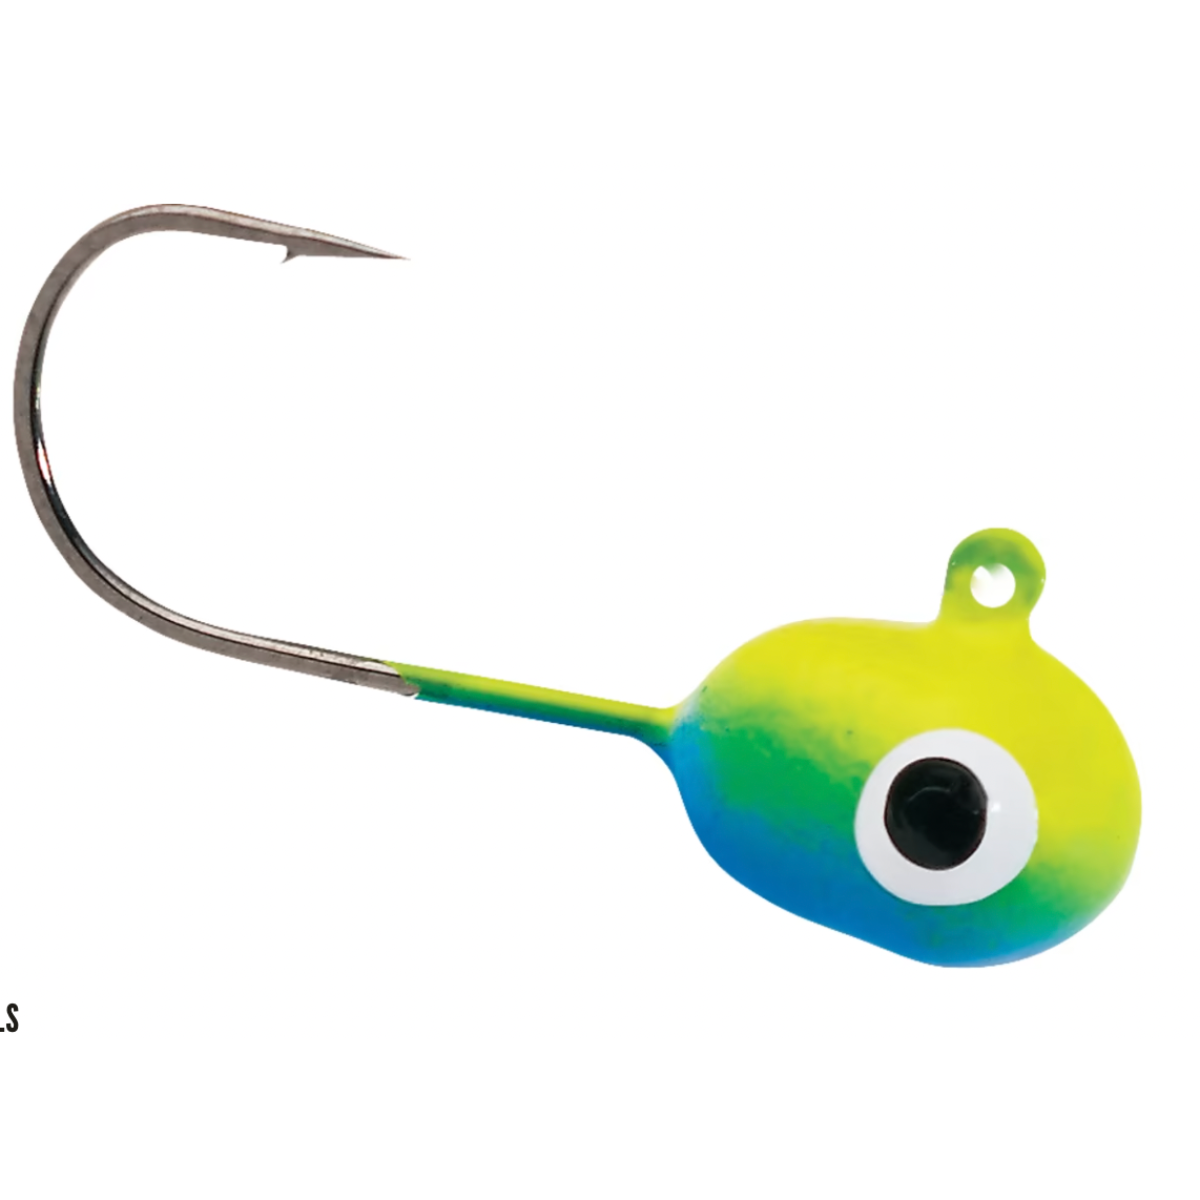 Erie Dearie Lure 5/8oz - Great Lakes Outfitters